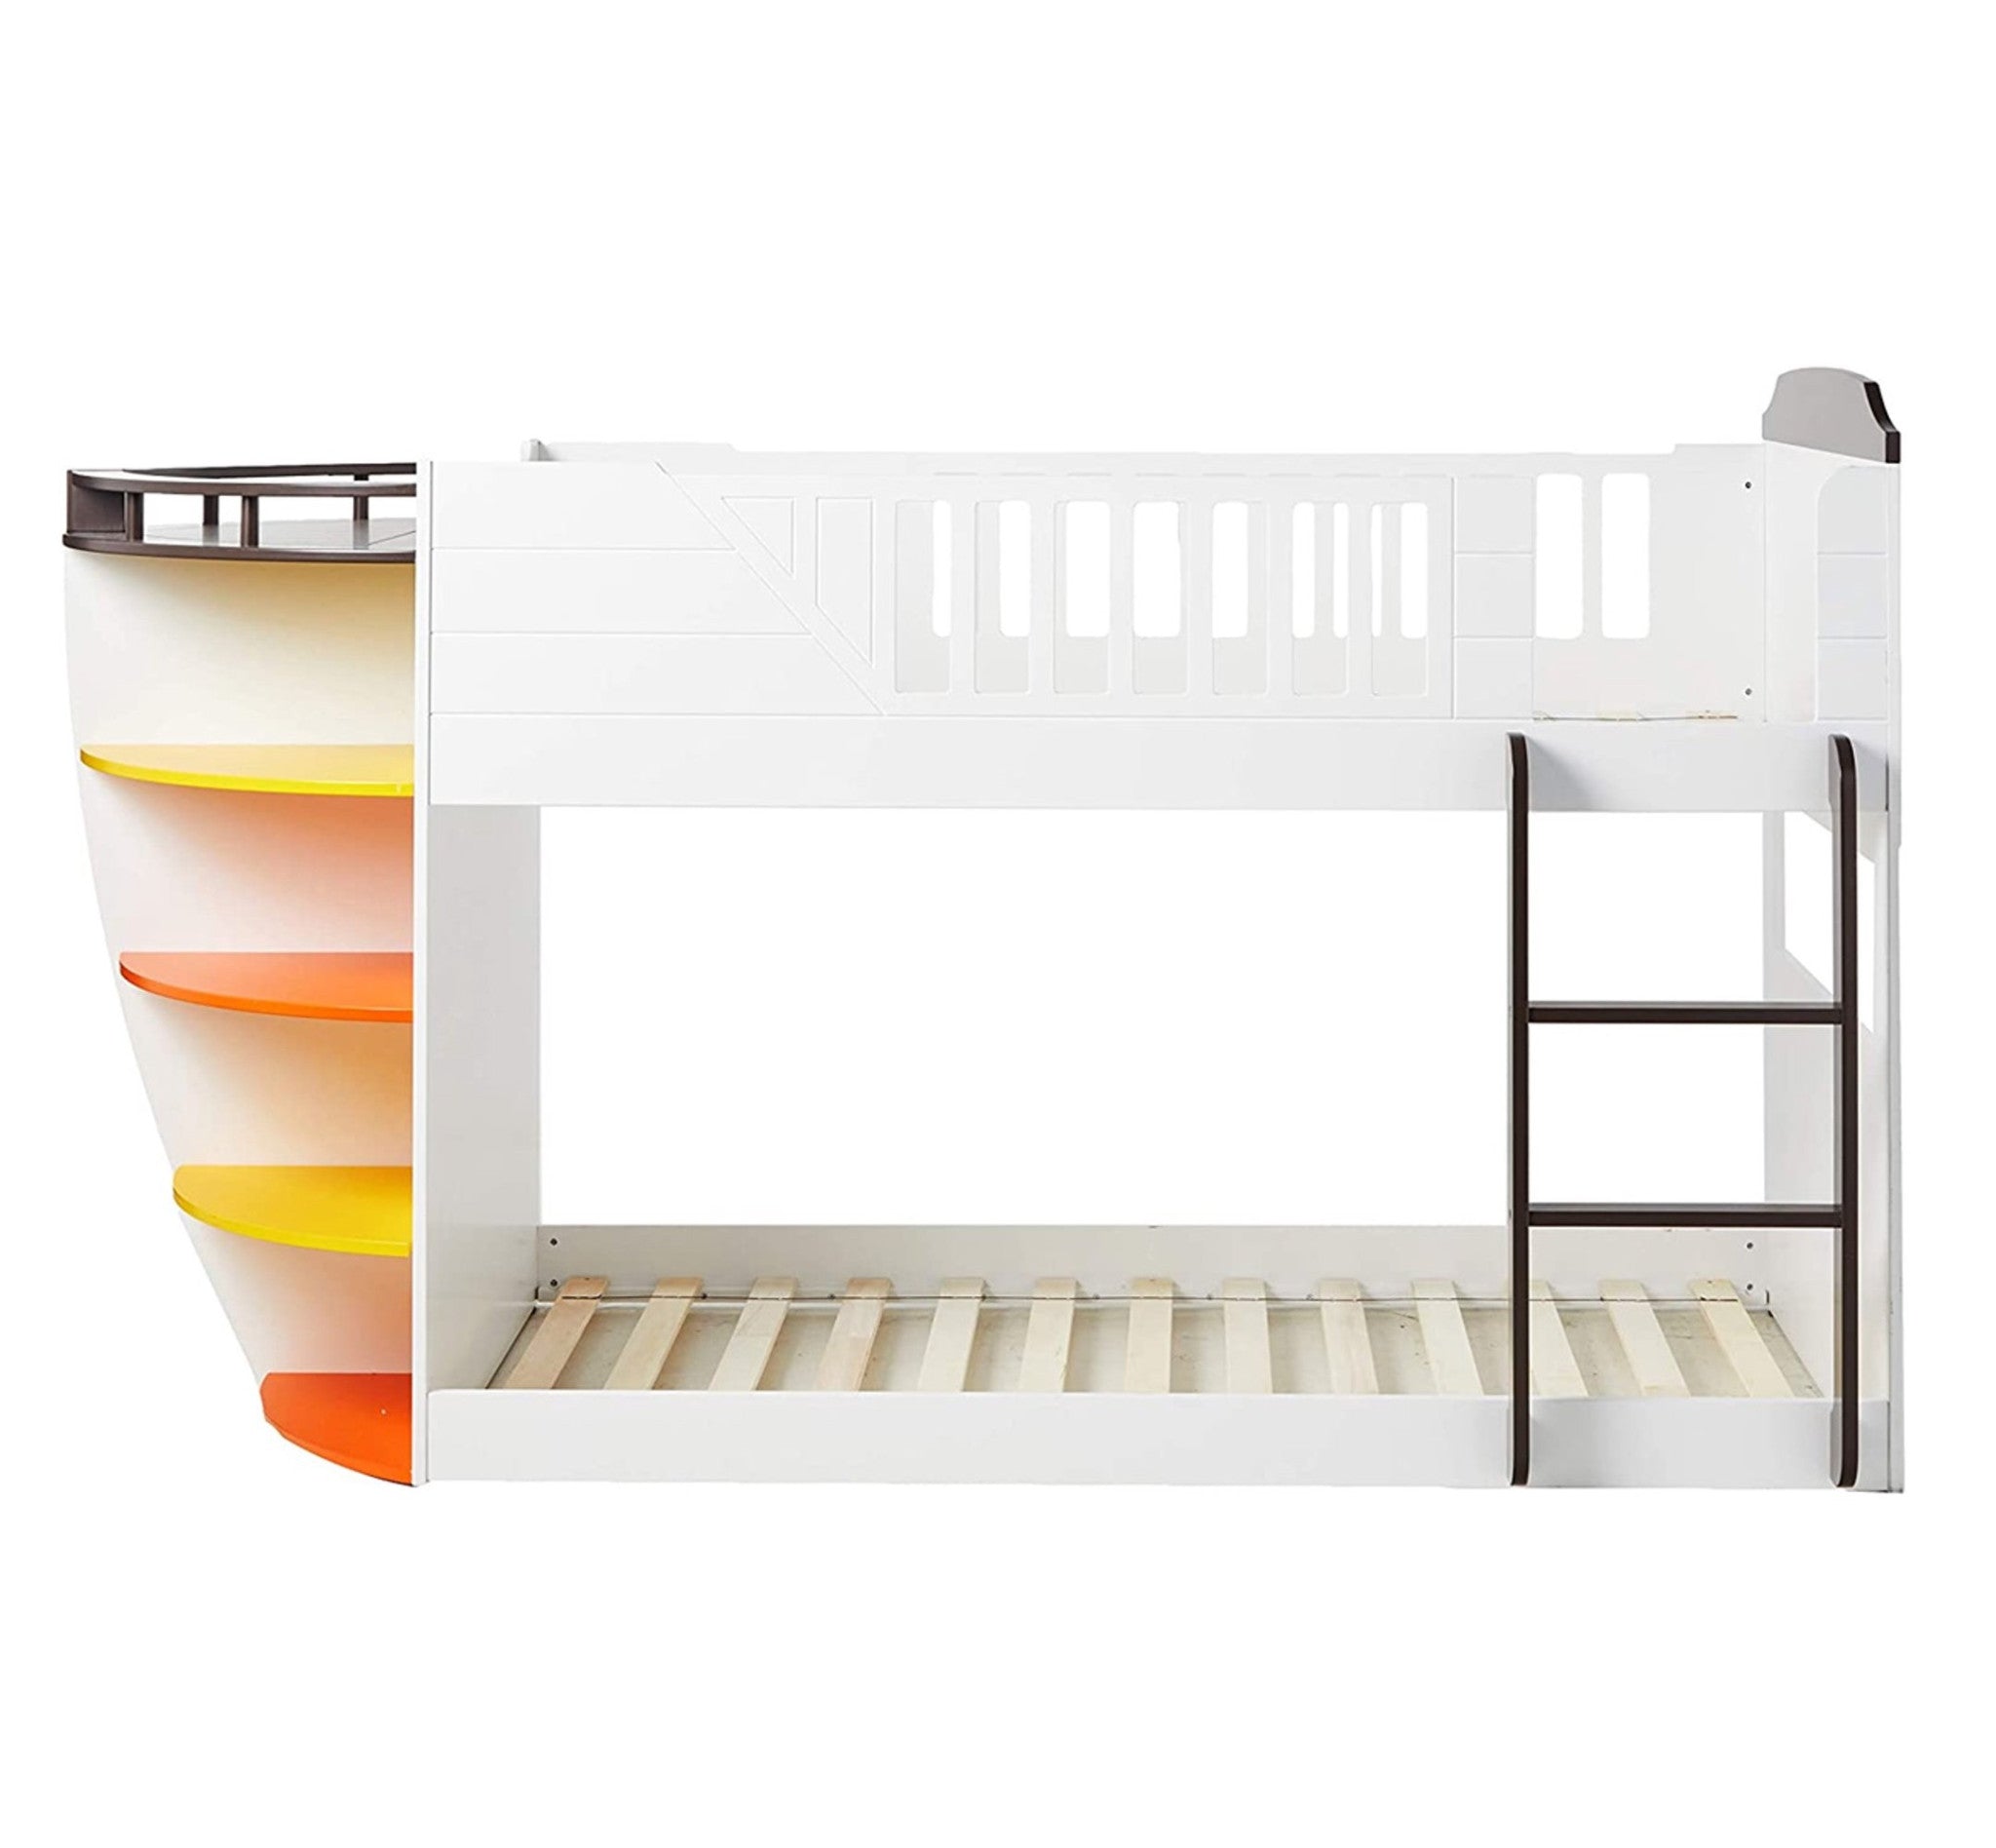 100" X 41" X 57" White And Chocolate Twin Over Twin Bunk Bed With Storage Shelf